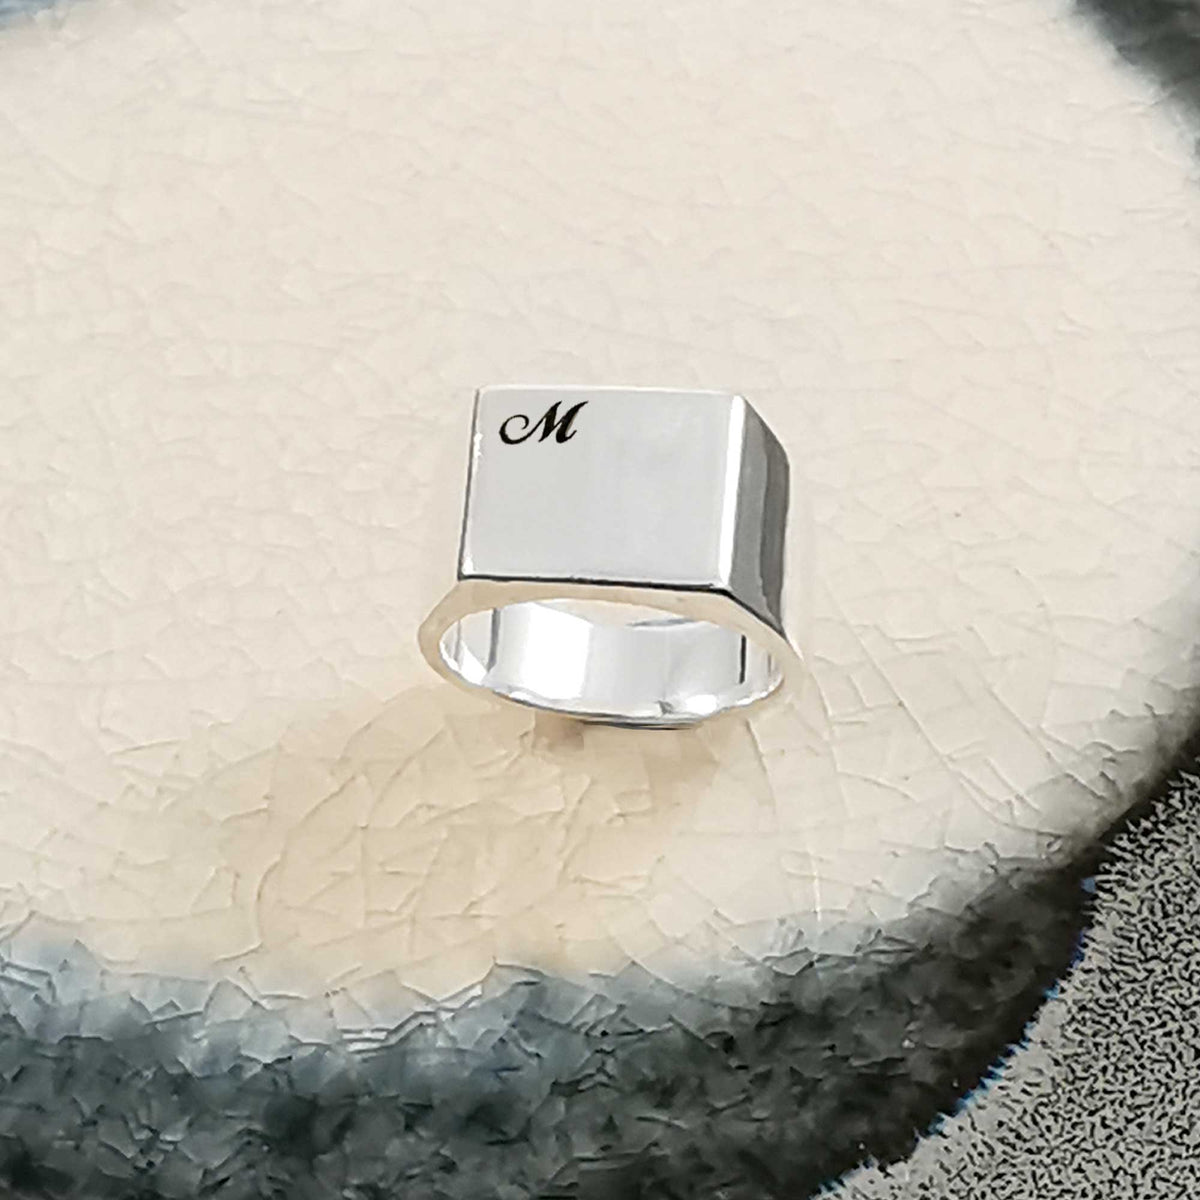 silver signet ring bespoke personalised engrave with script monogram initials mans pinky ring gift for son grandson